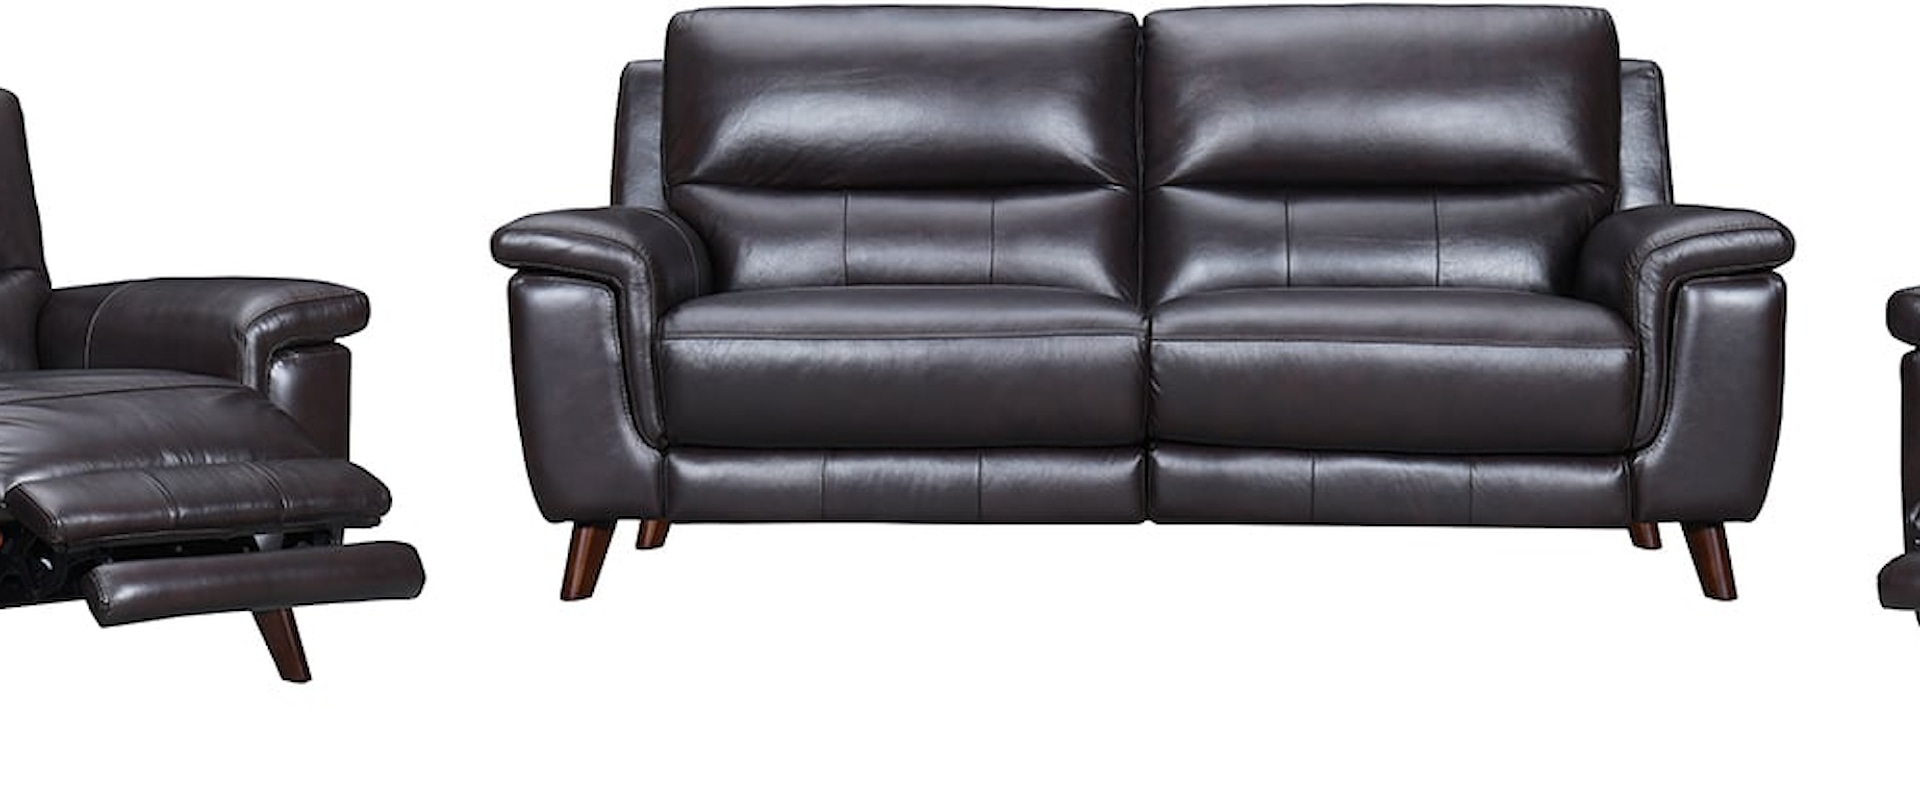 Contemporary Brown Leather Power Reclining Living Room Set with USB